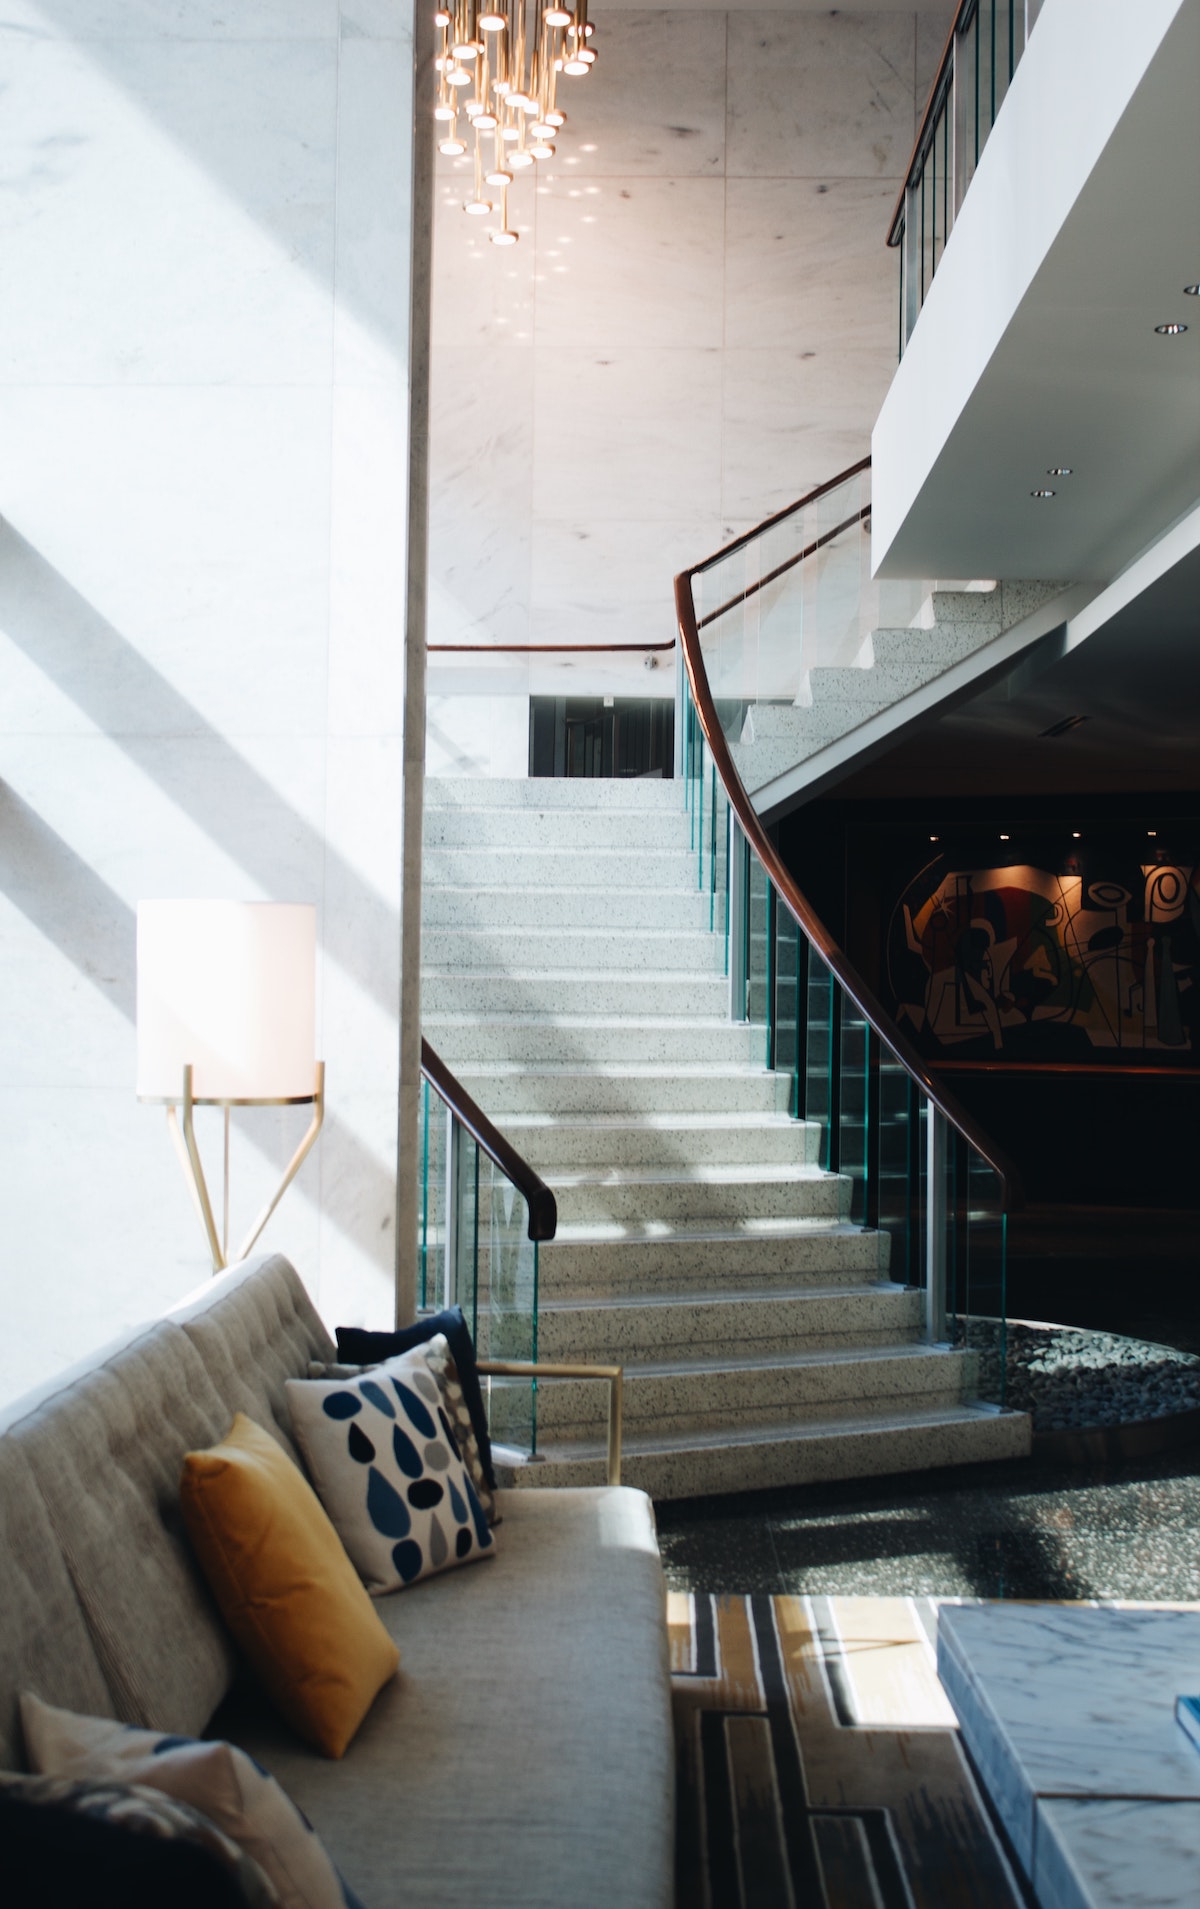 Lobby of a boutique hotel decorated in neutral tones with a stone staircase leading in